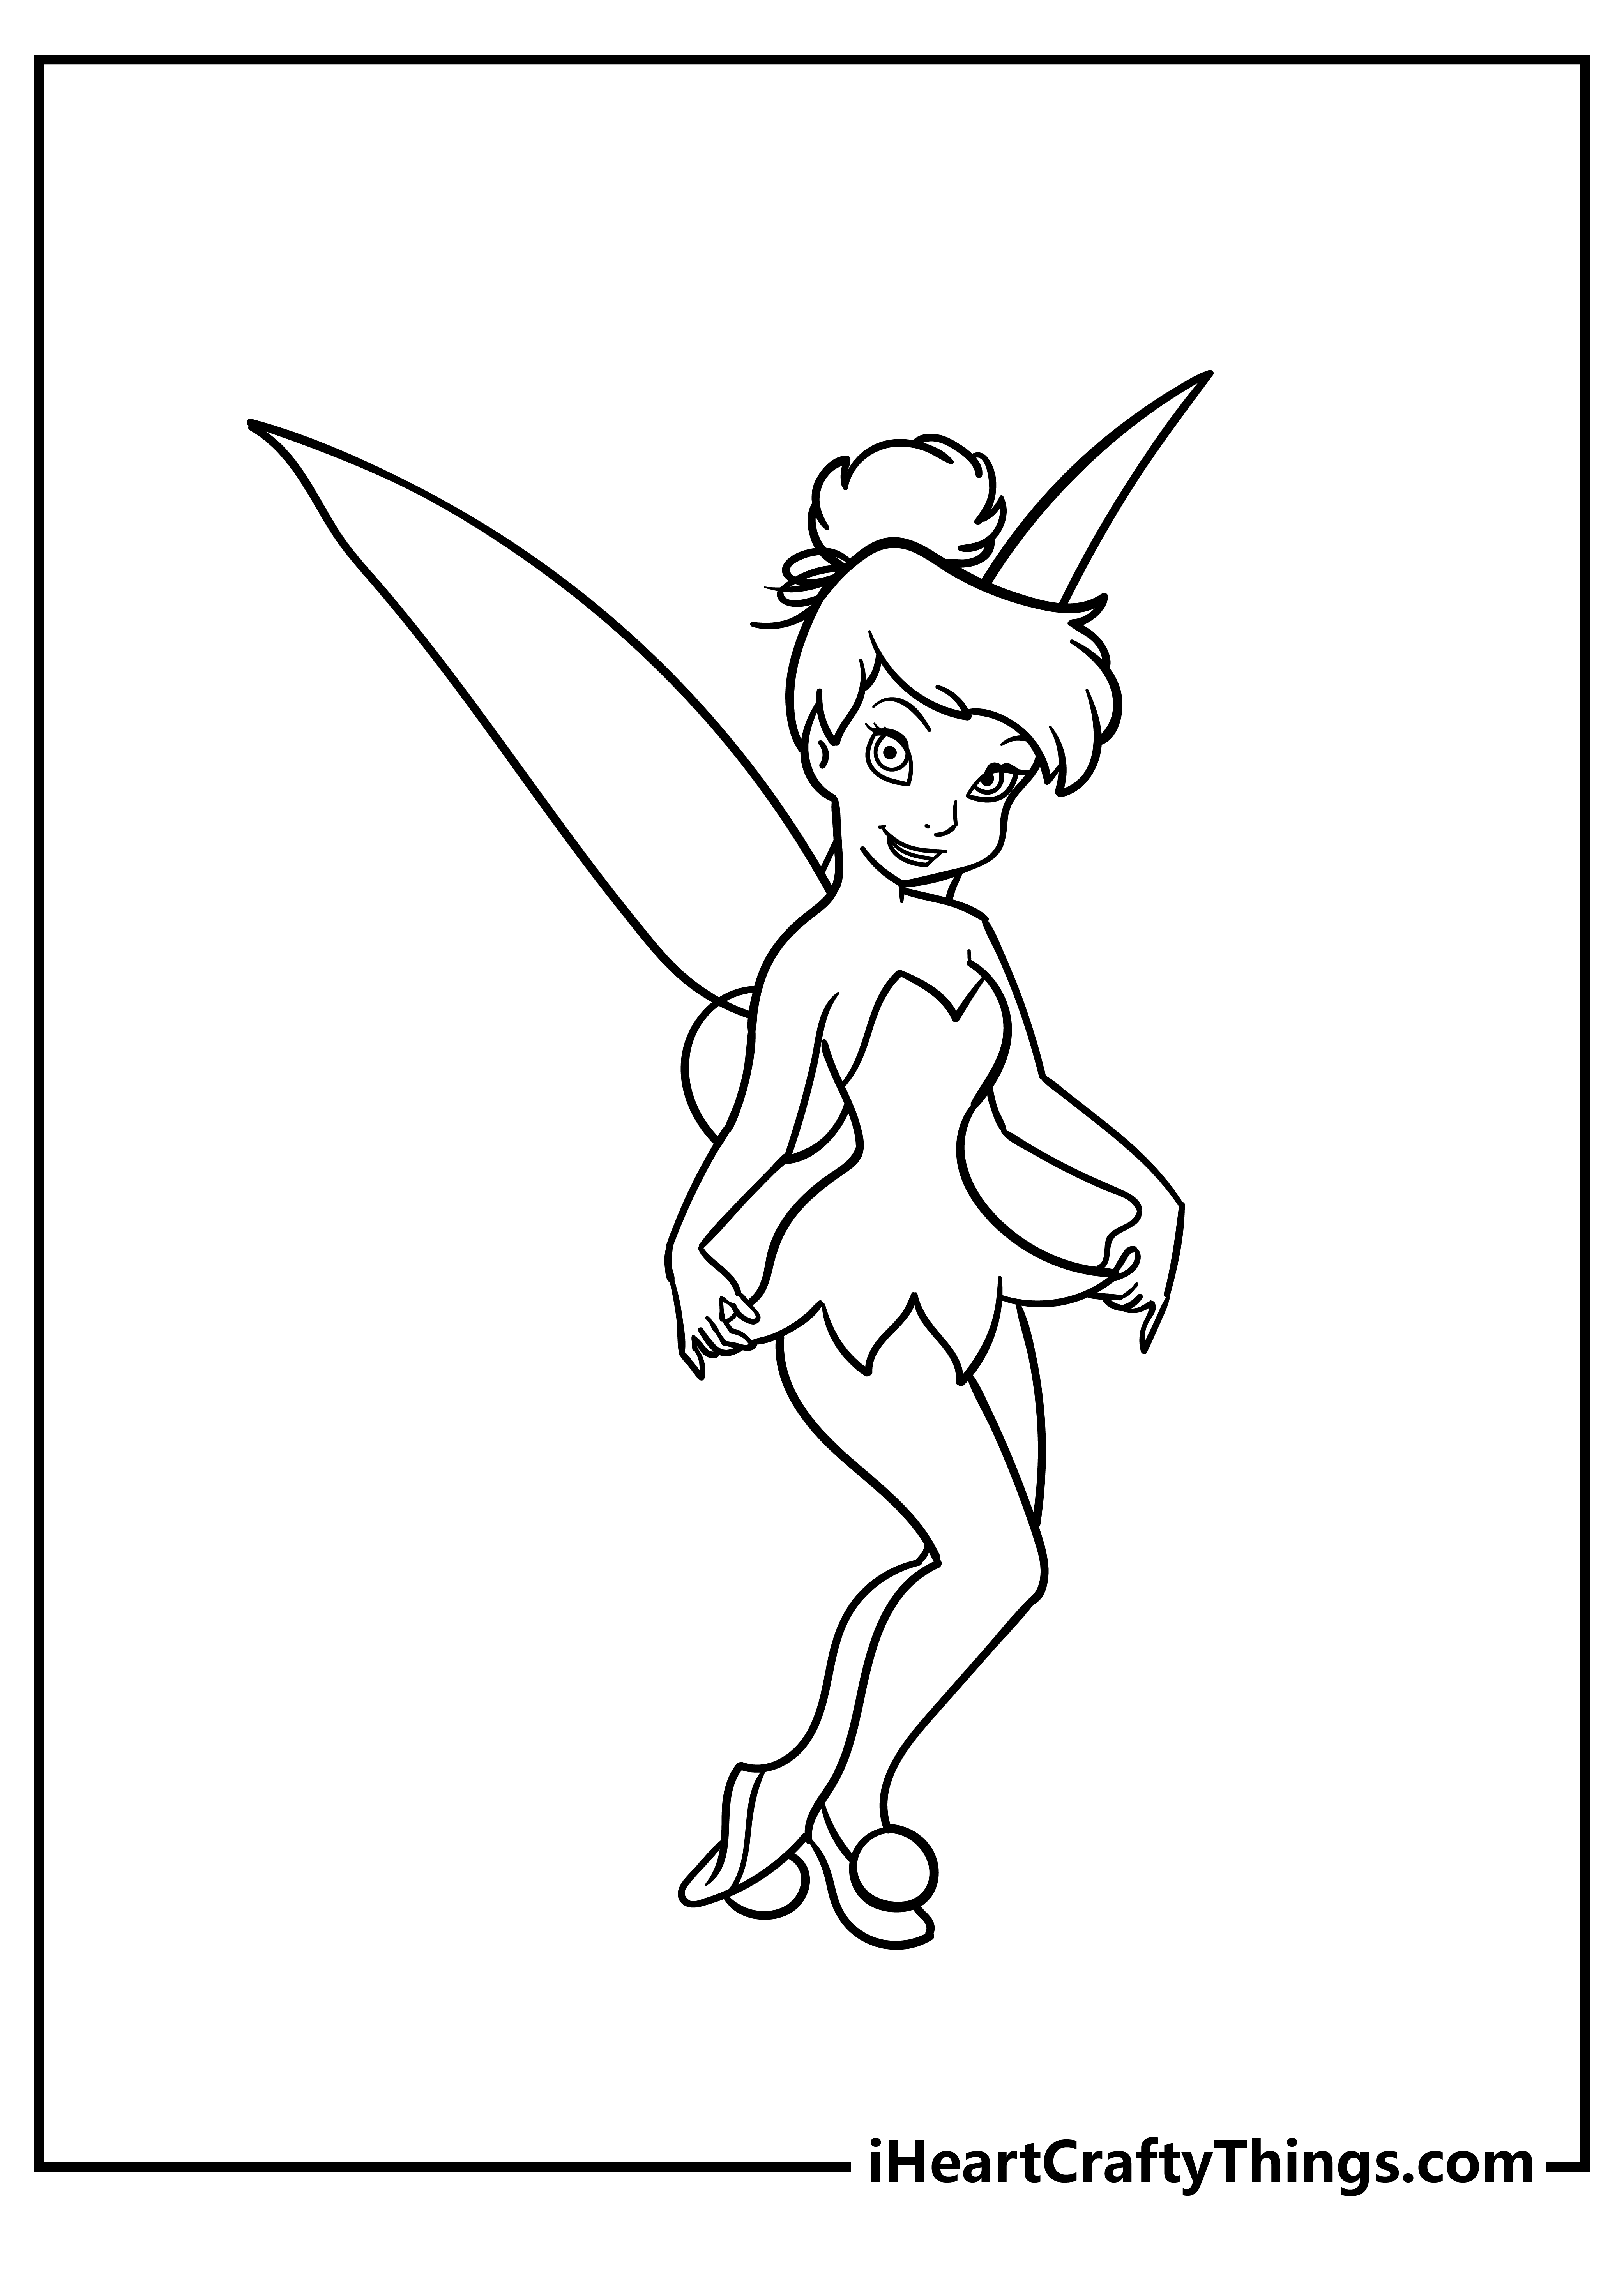 Printable Tinkerbell Coloring Pages Updated 20